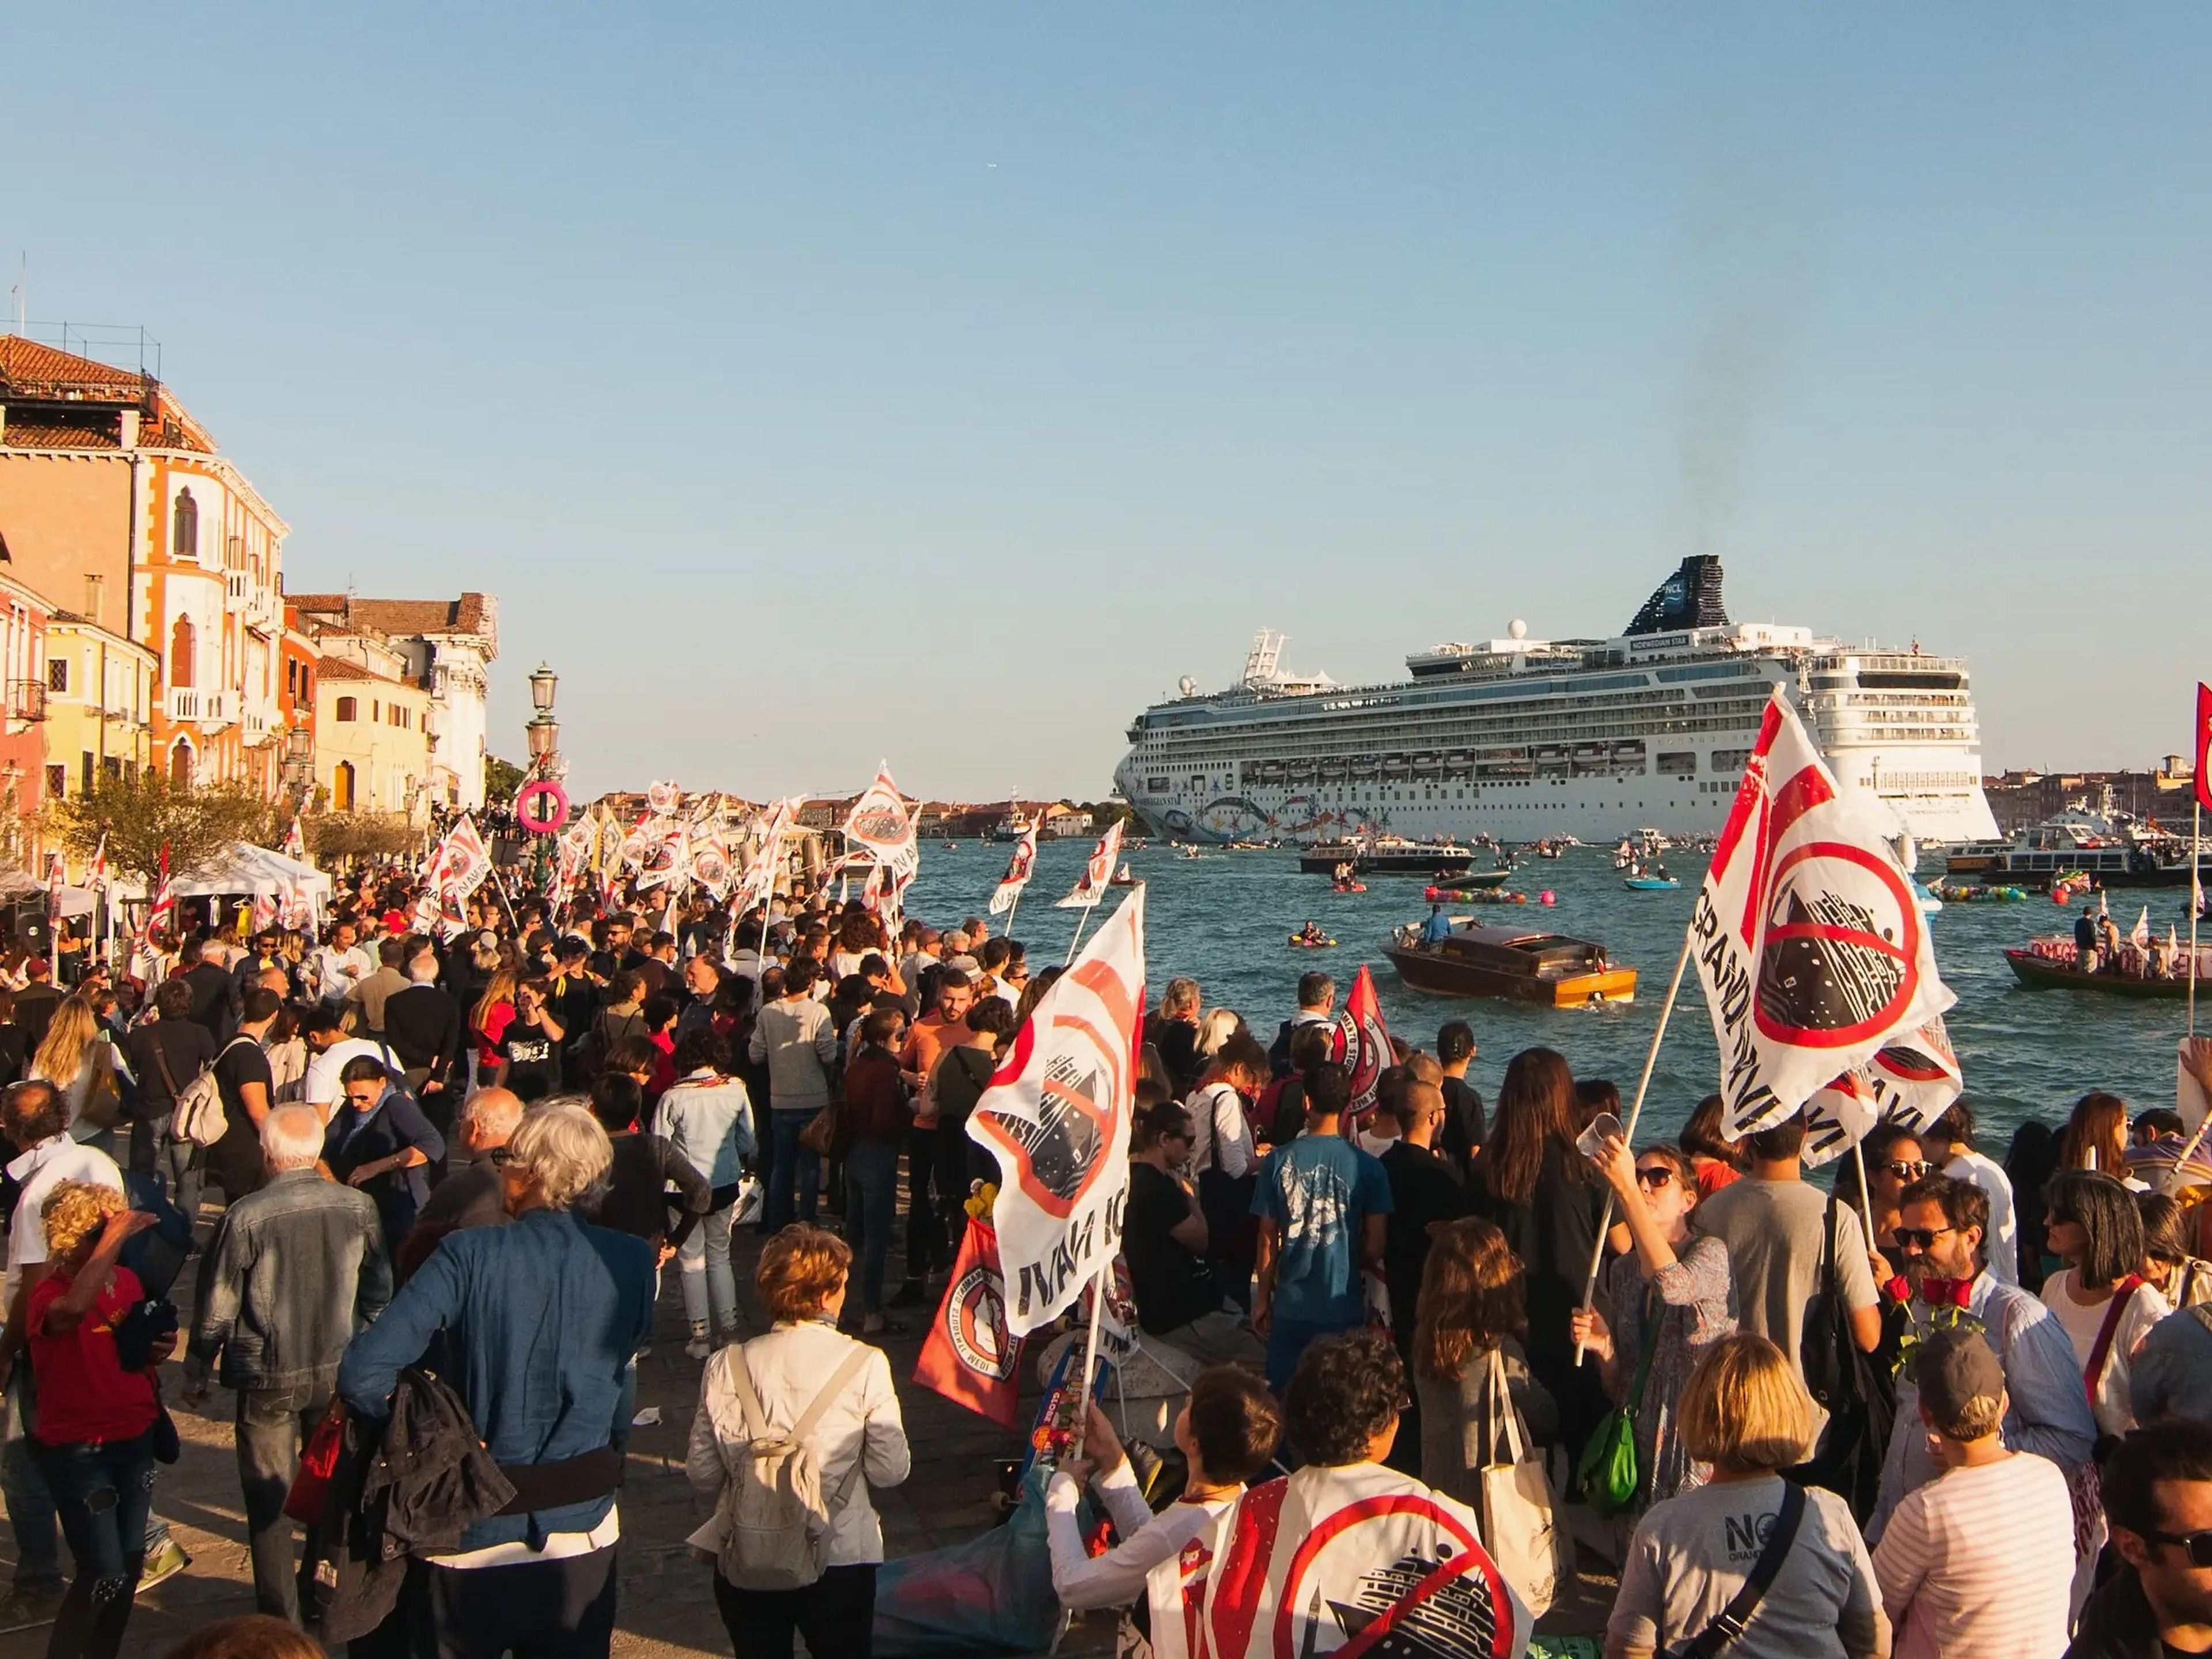 A group of protestors standing on the coastline and in small boats waving flags at a cruise ship.